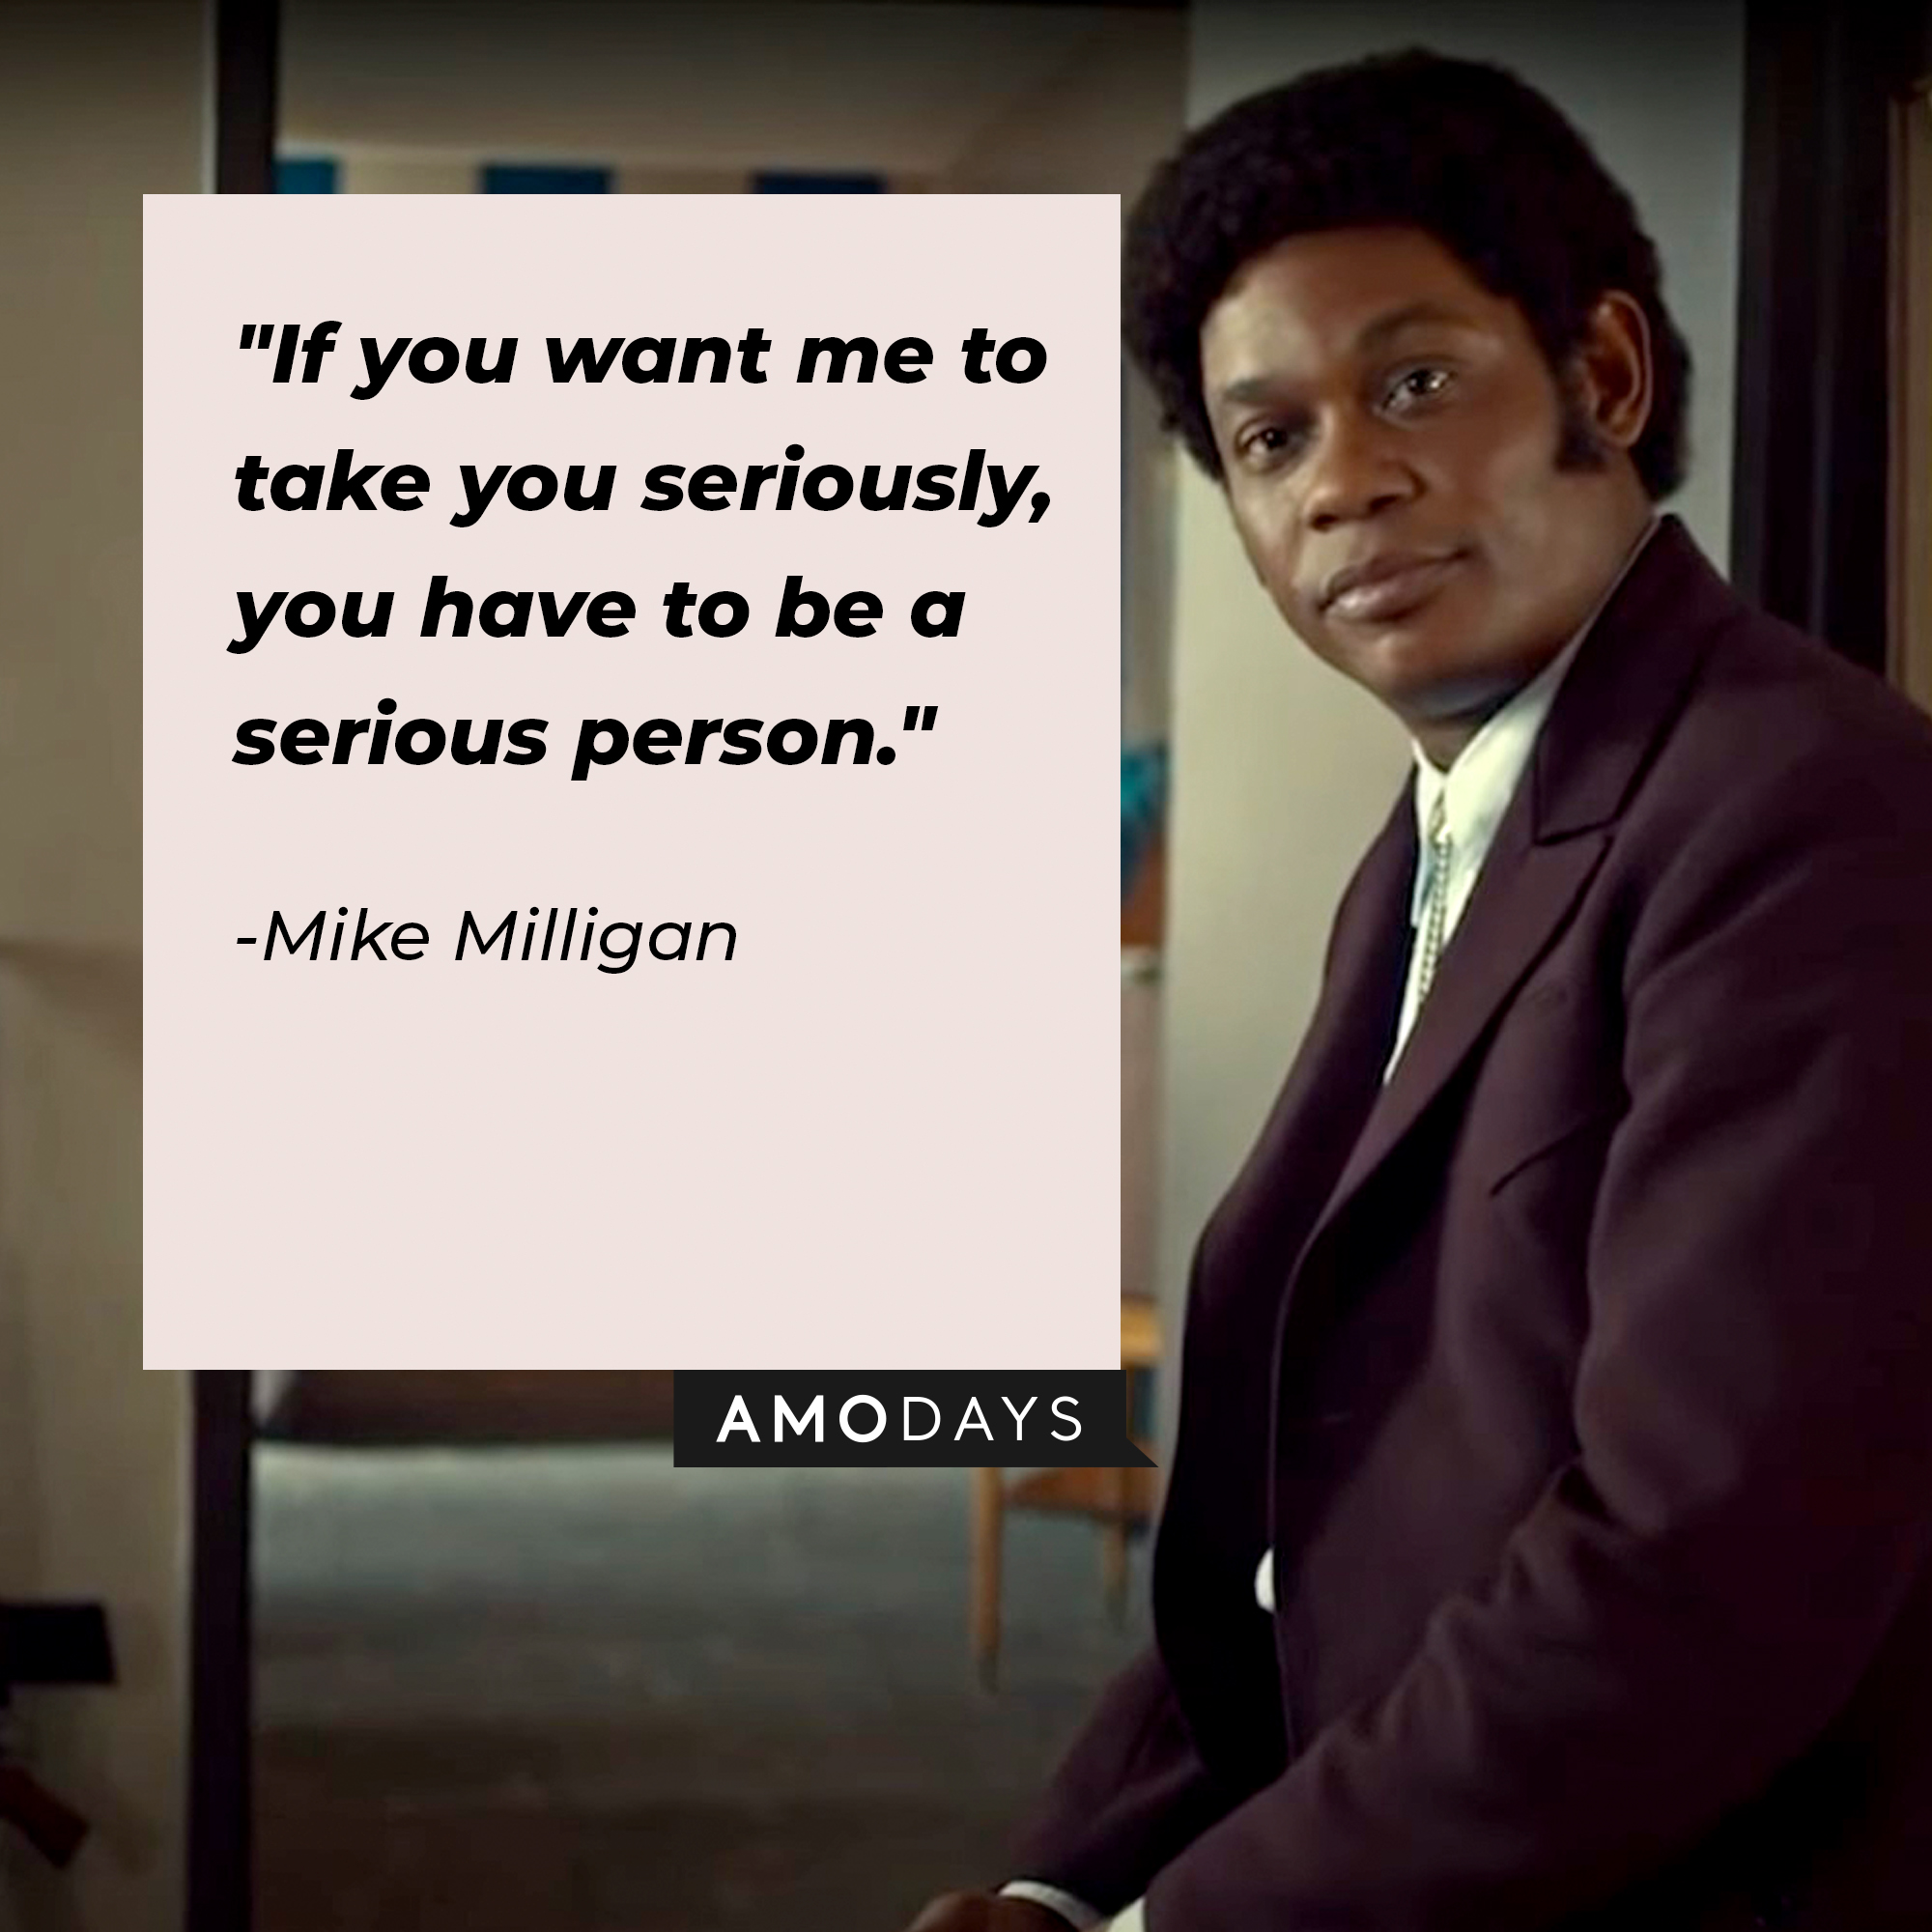 Mike Milligan with his quote: "If you want me to take you seriously, you have to be a serious person." | Source: youtube.com/Netflix